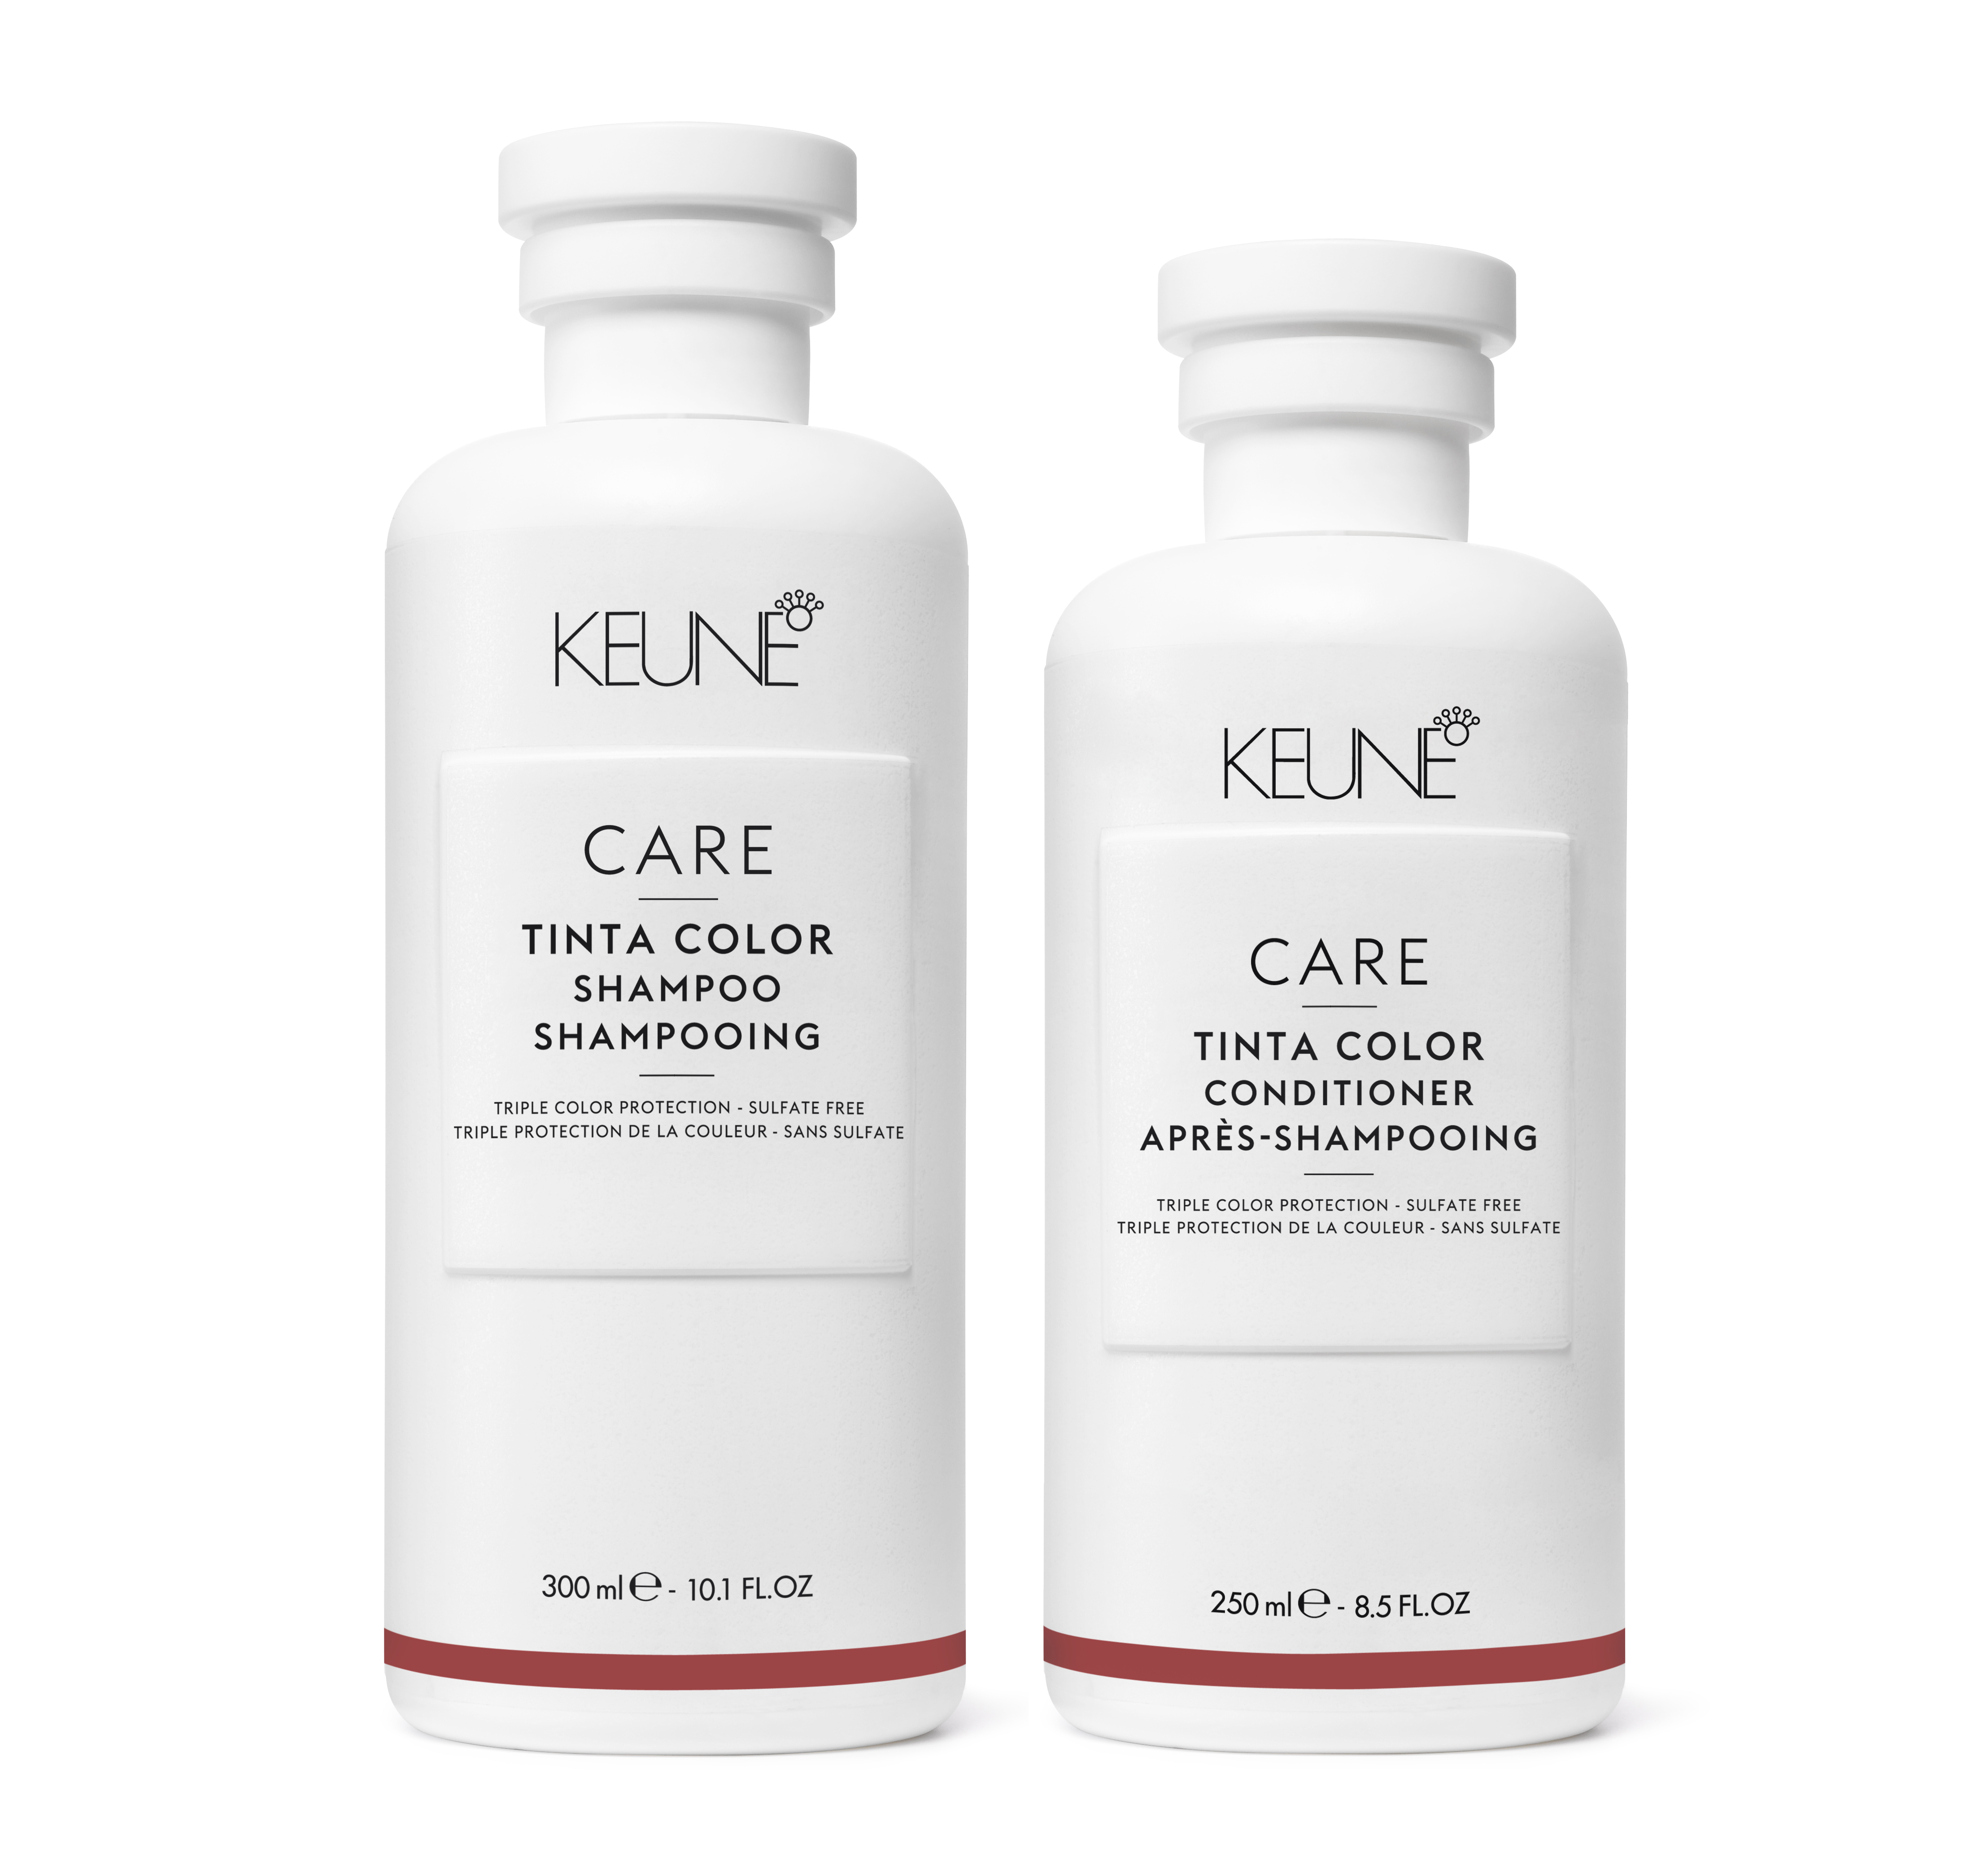 Top 4 for Pairing and Conditioner - Keune EducationKeune Education